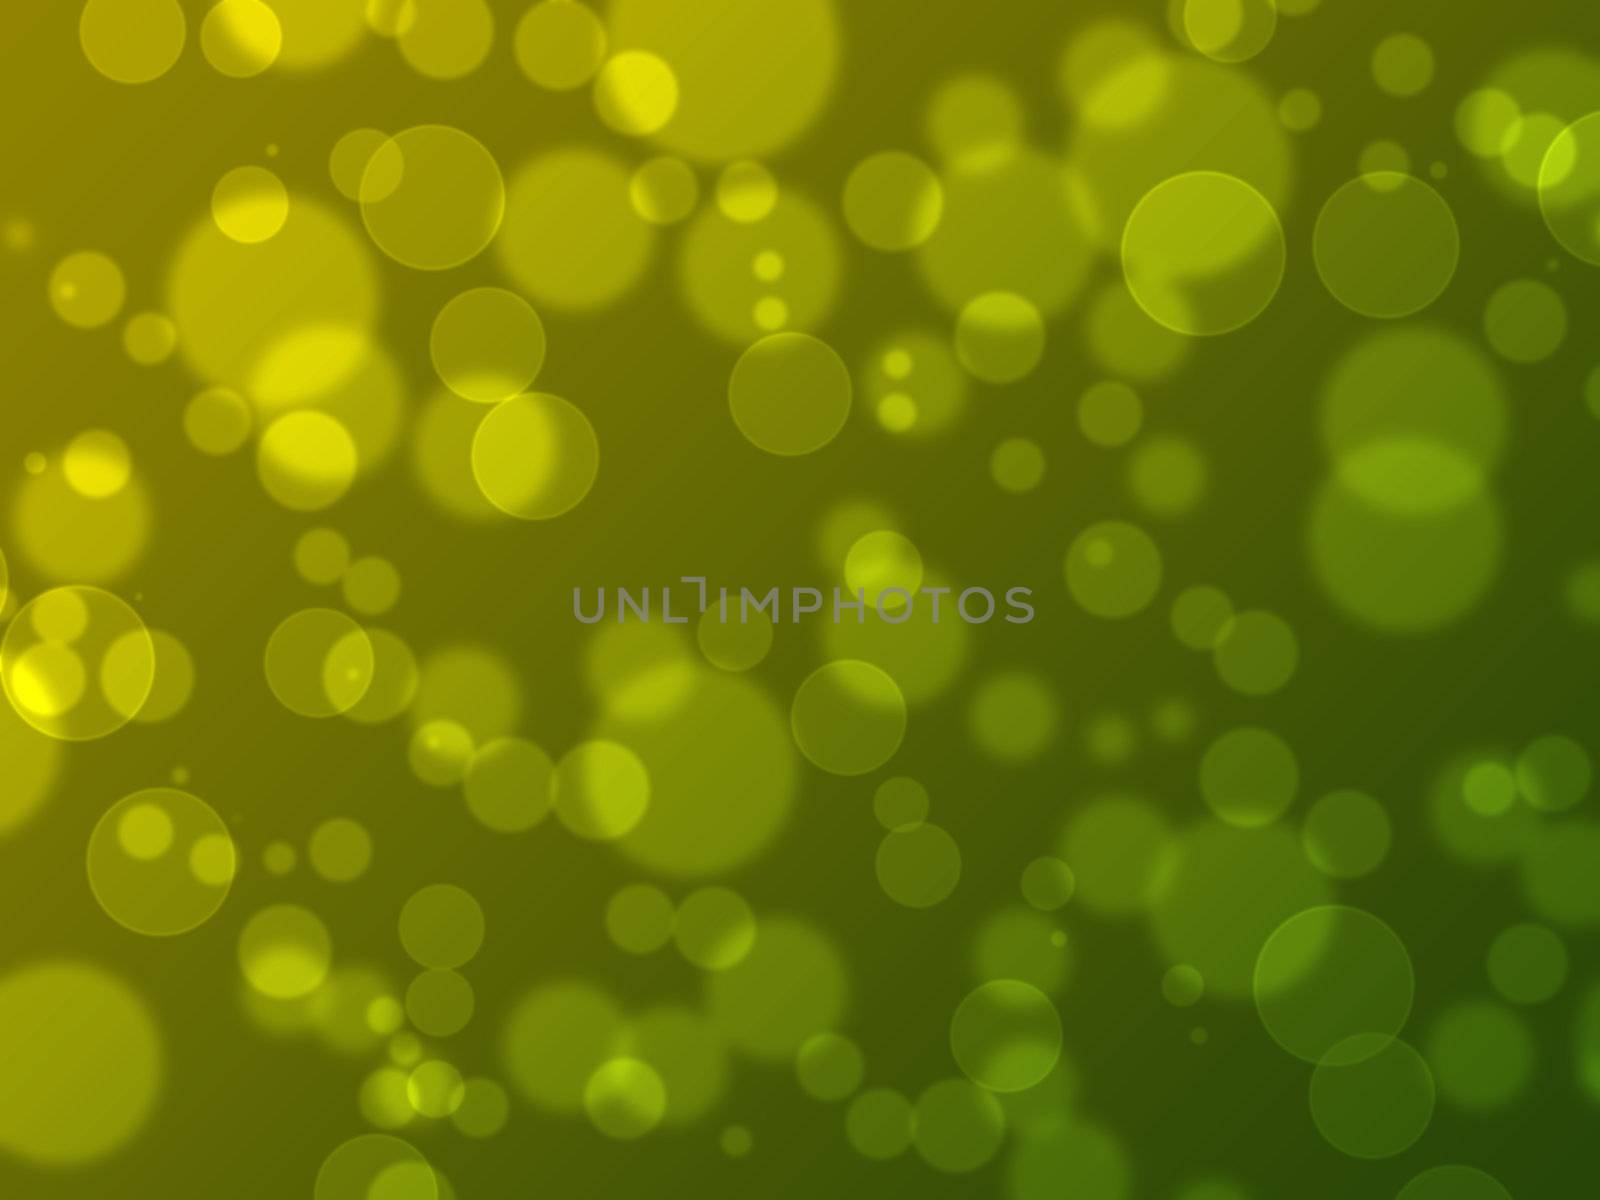 Abstract on a colorful background digital bokeh effect